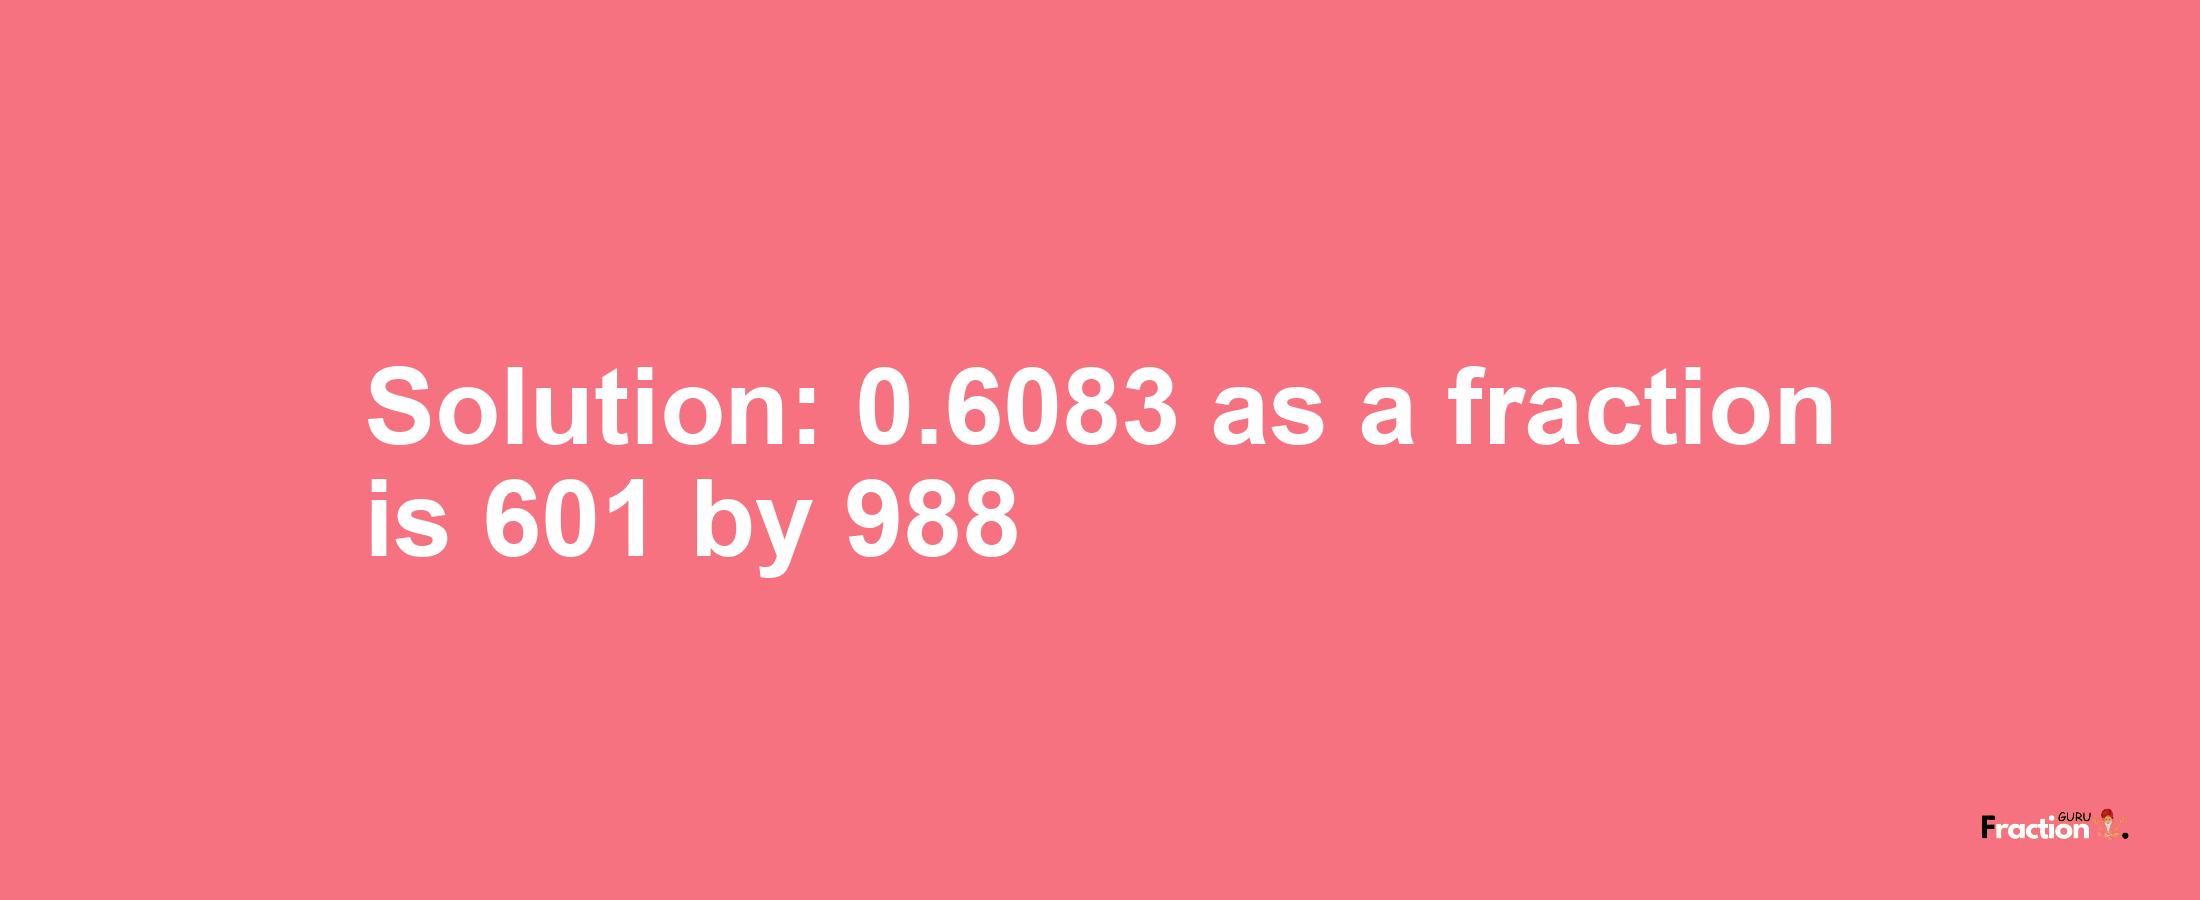 Solution:0.6083 as a fraction is 601/988